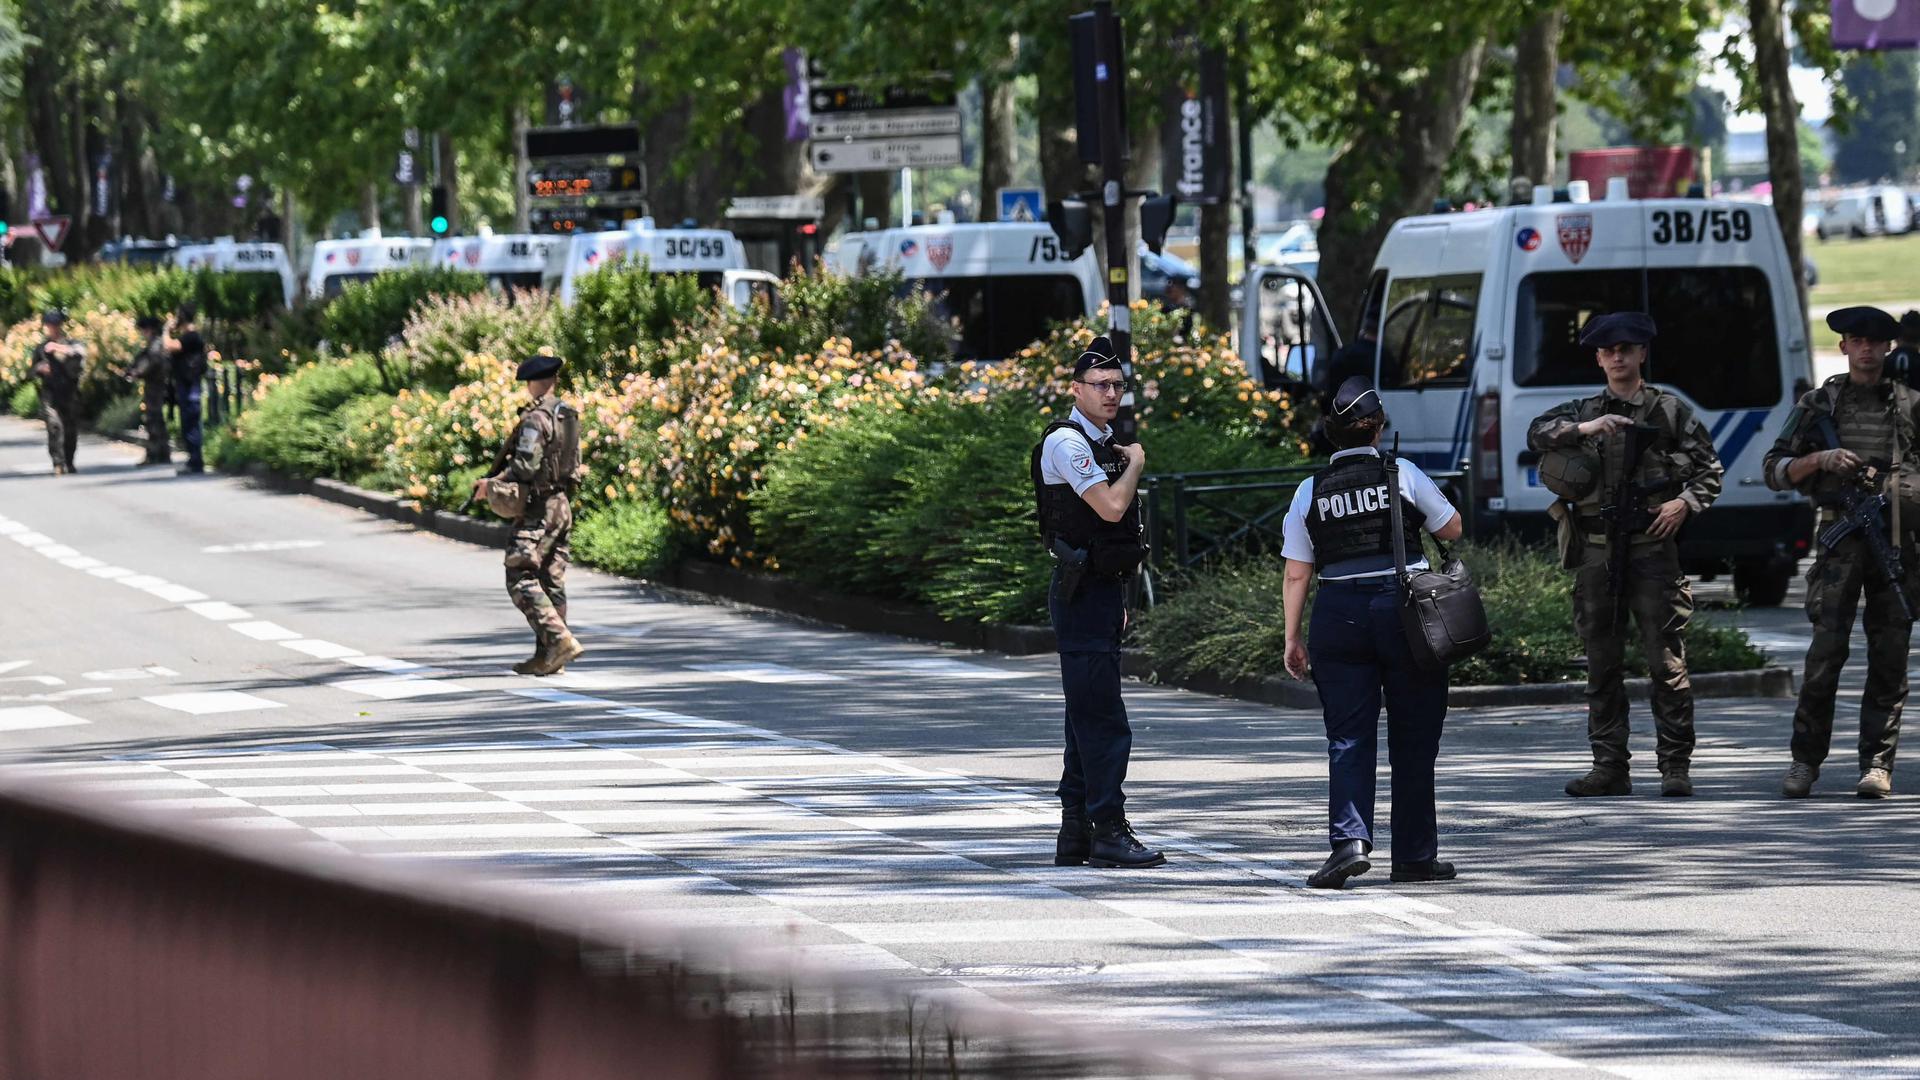 French police officers and French elite mountain infantry force 'Chasseurs Alpins' stand guard near the 'Jardins de l'Europe' in Annecy, central-eastern France on June 8, 2023, following a mass stabbing in the French Alpine town. Seven people, including six children, have been injured in a mass stabbing in the town of Annecy in the French Alps, security sources told AFP. A man armed with a knife attacked a group of children aged around three years old as they played in a park near the lake in the town at around 9:45 am (0745 GMT), a security source who asked not to be named and a local official told AFP. (Photo by OLIVIER CHASSIGNOLE / AFP)